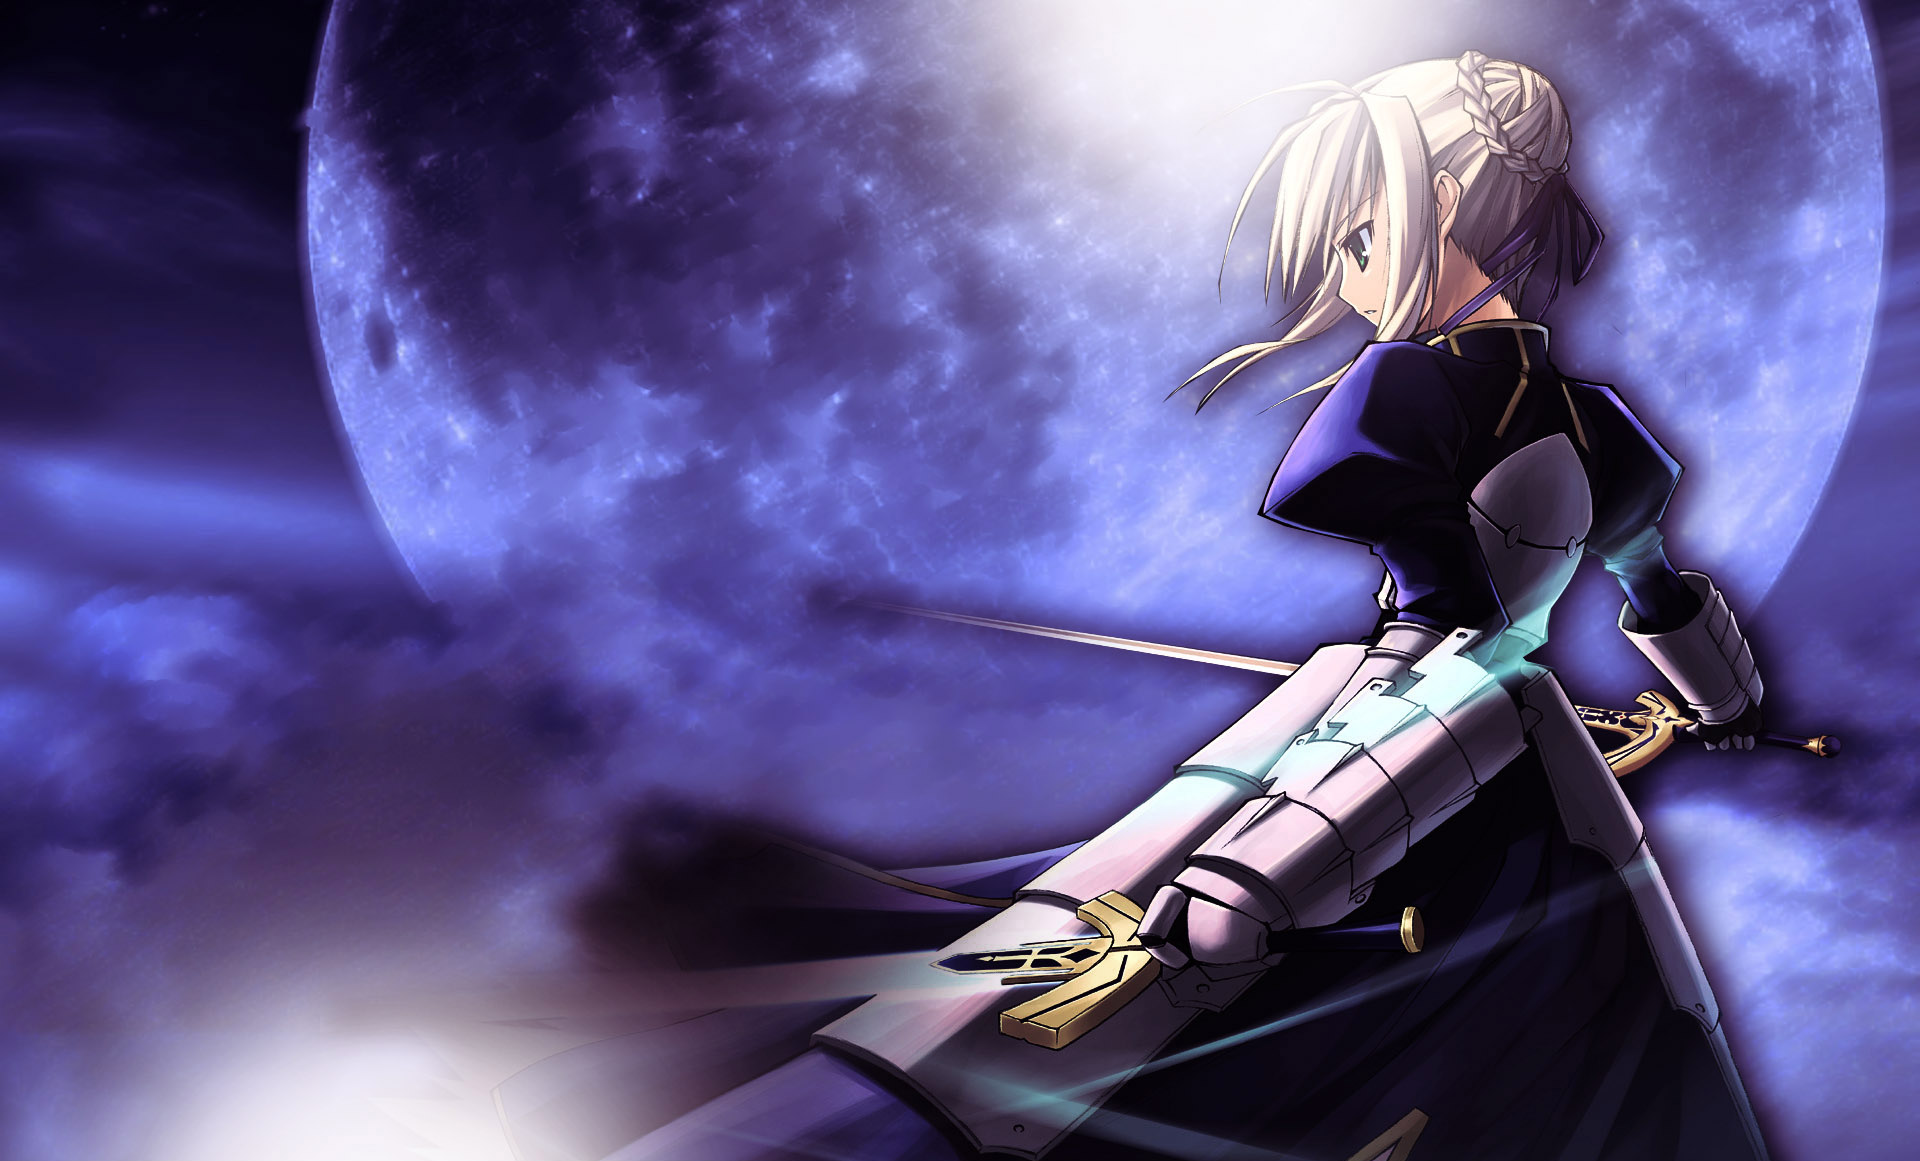 Free Hd Photos Saber Fate Stay Night - Fate Stay Night Saber Background , HD Wallpaper & Backgrounds